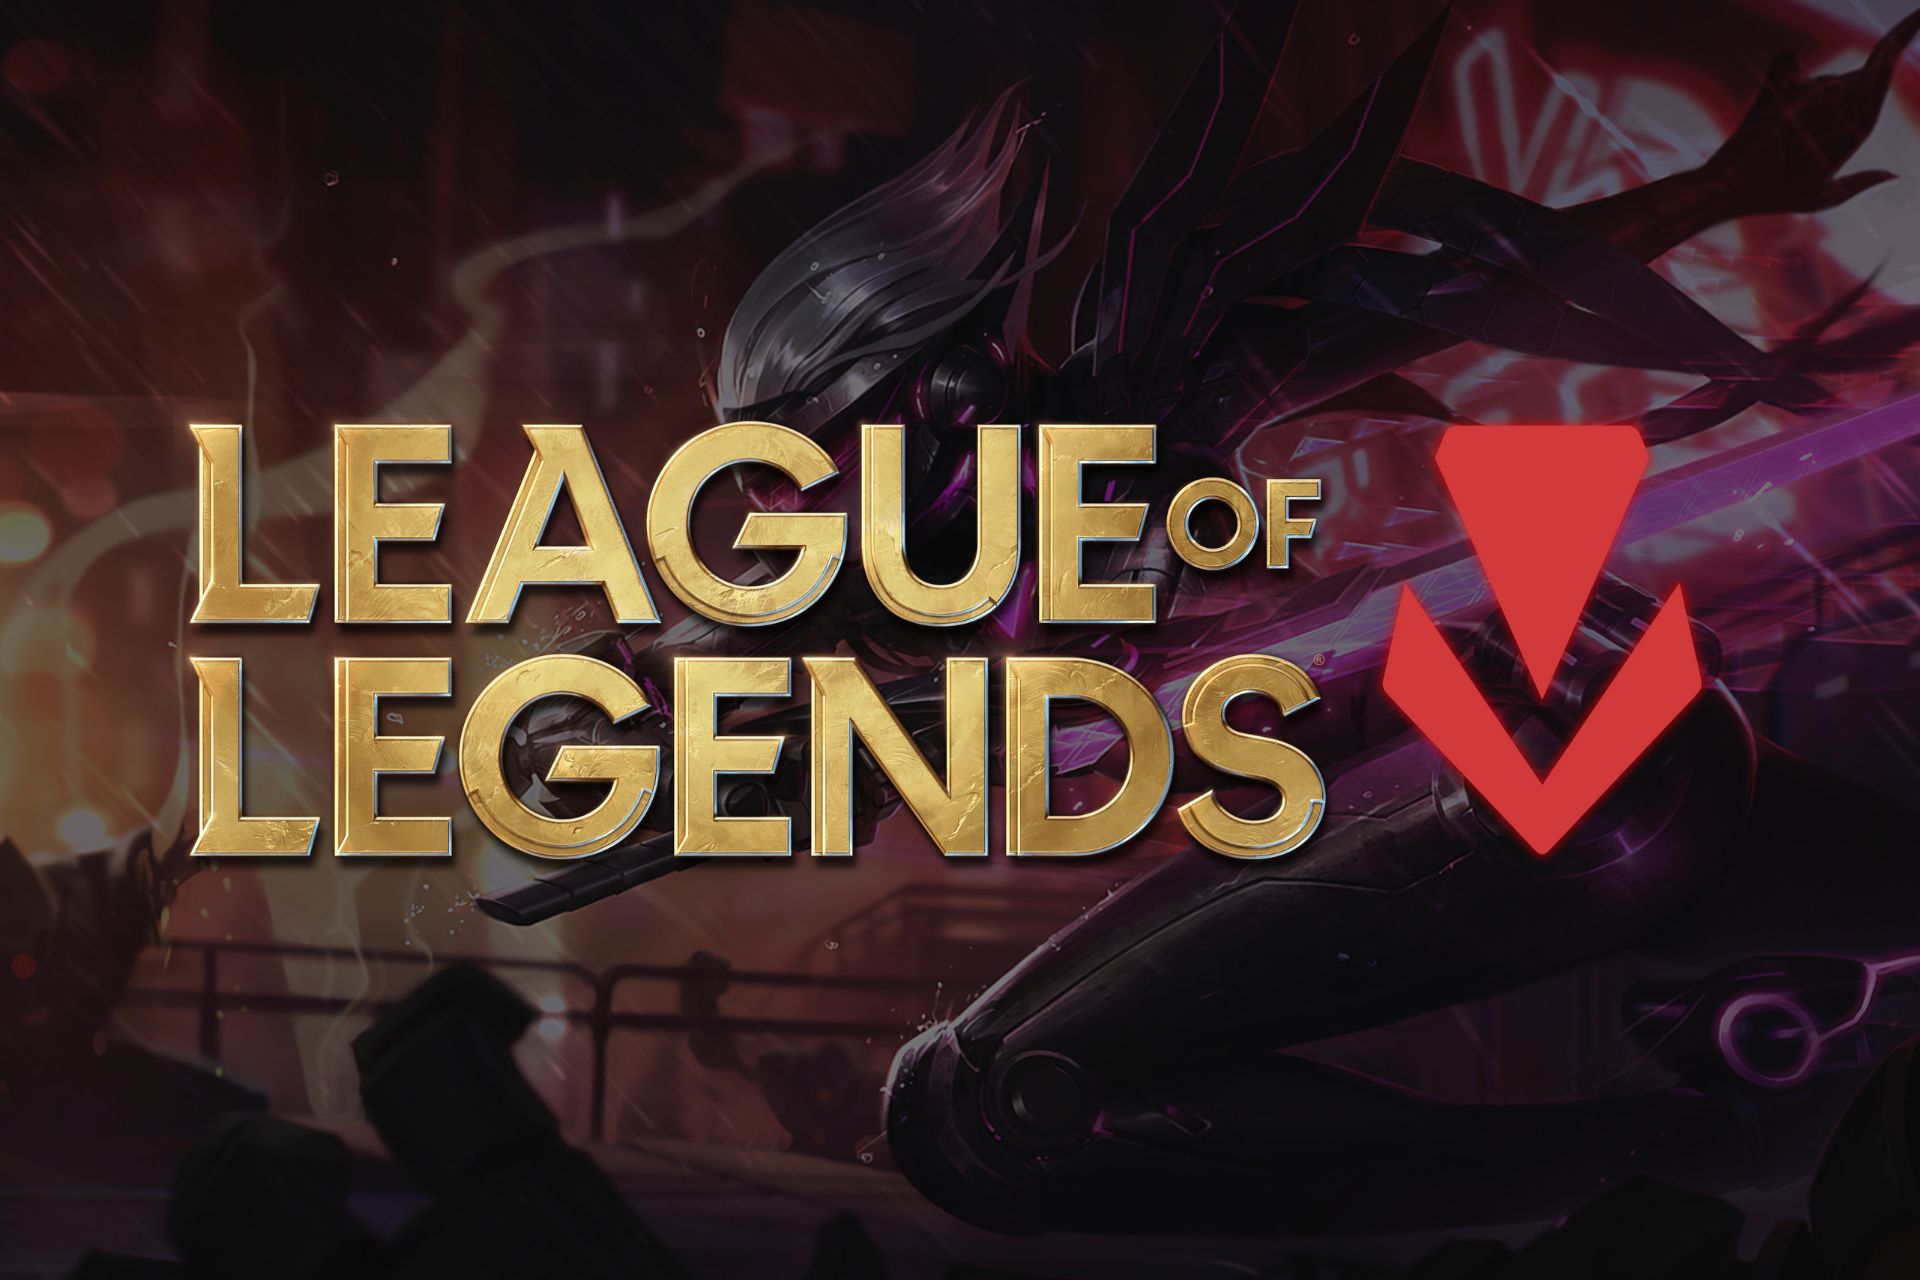 Riot Vanguard showcased next to the League of Legends Logo